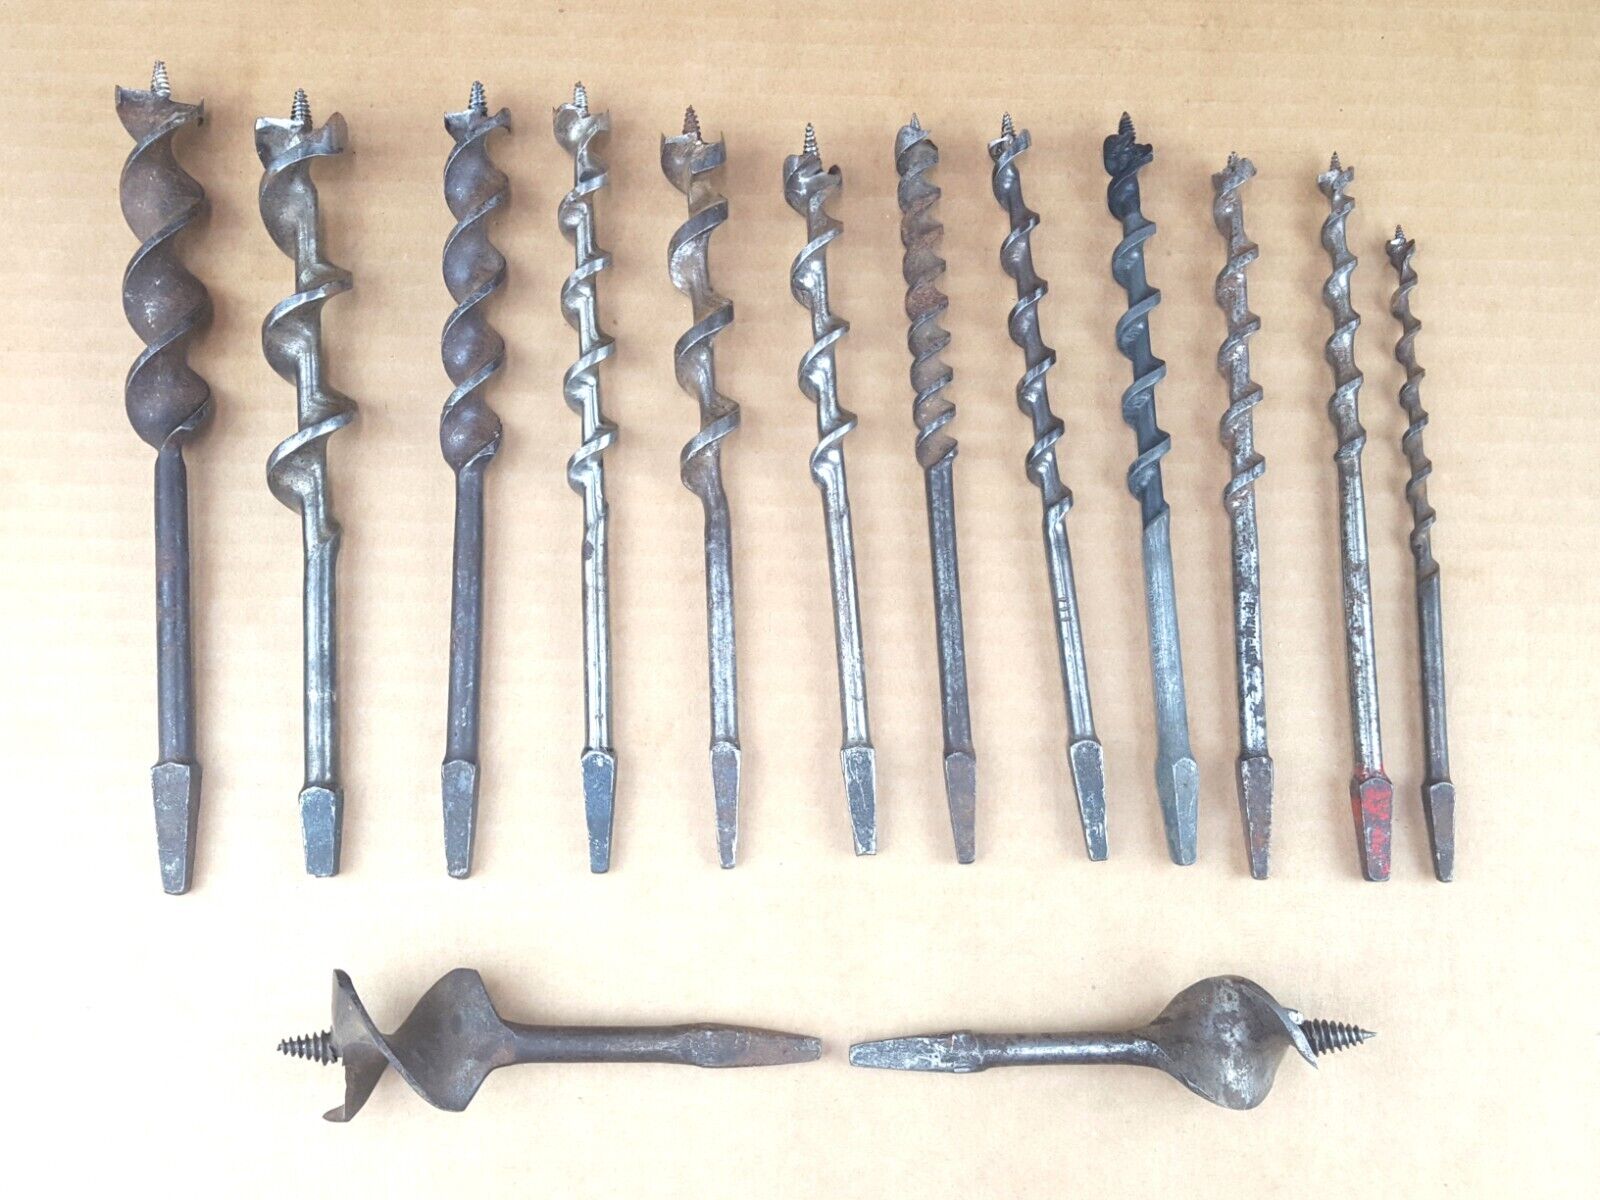 14 Vintage Brace Drill Auger Bits Irwin Millers Falls Stanley Caldwell etc